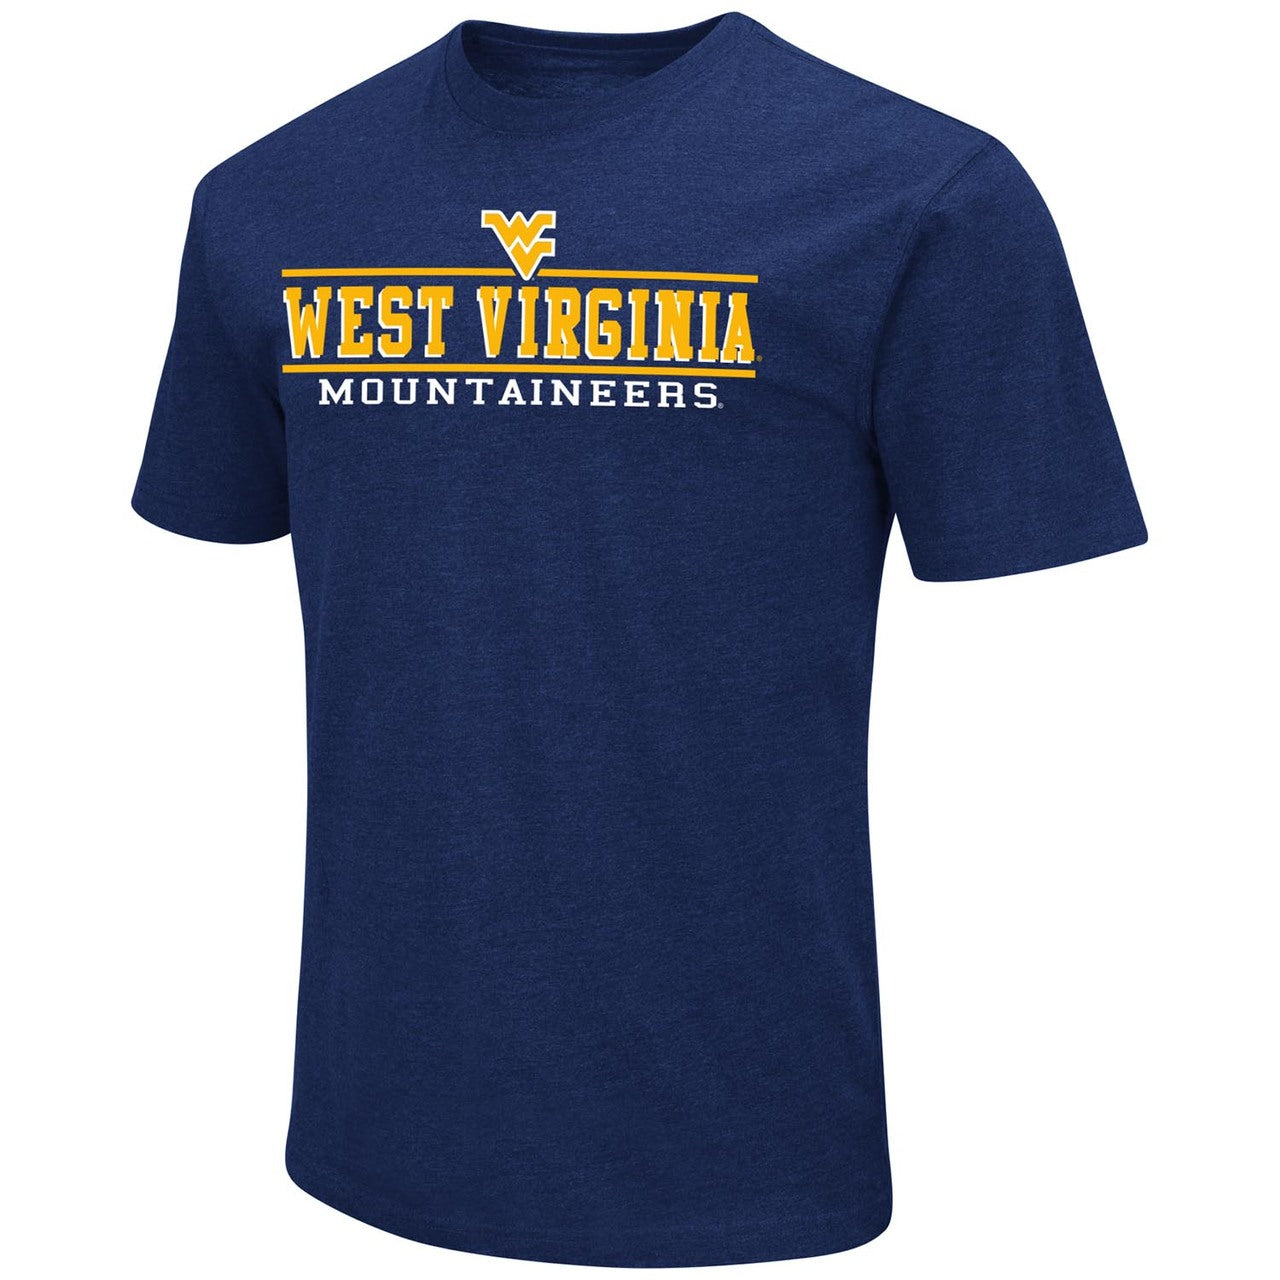 West Virginia Mountaineers NCAA Adult Soft Vintage Tailgate T-Shirt  - Navy